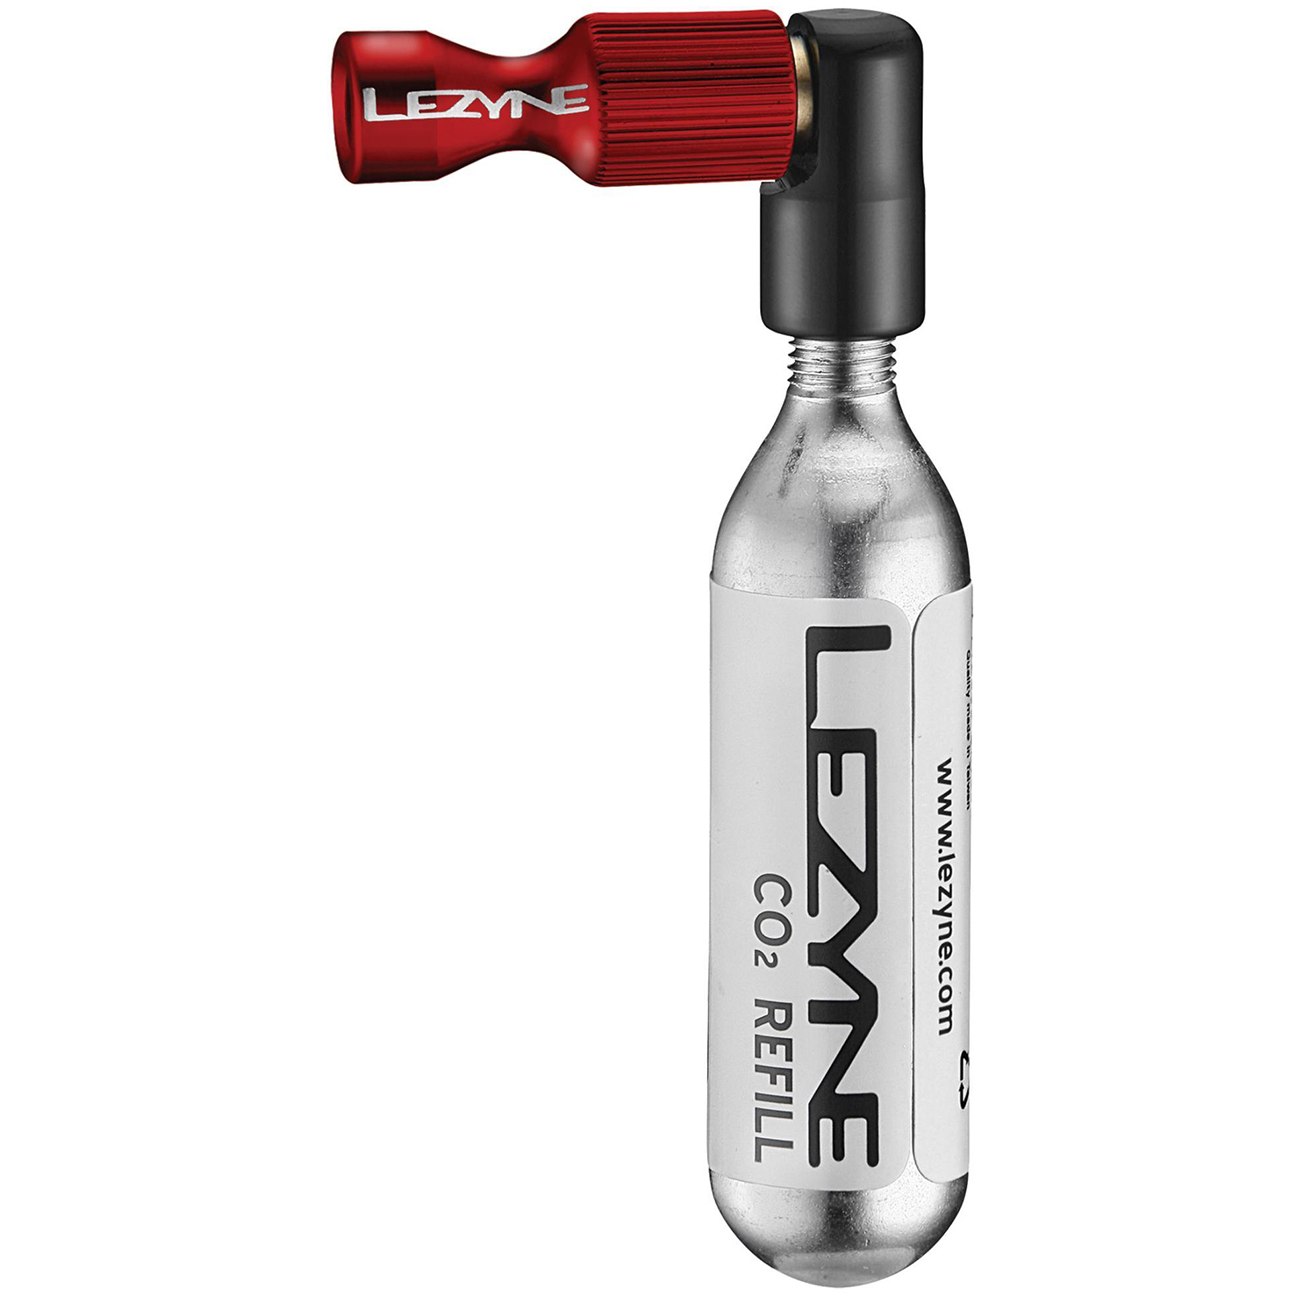 Picture of Lezyne Trigger Drive CO2 Cartridge Pump - 16g - red